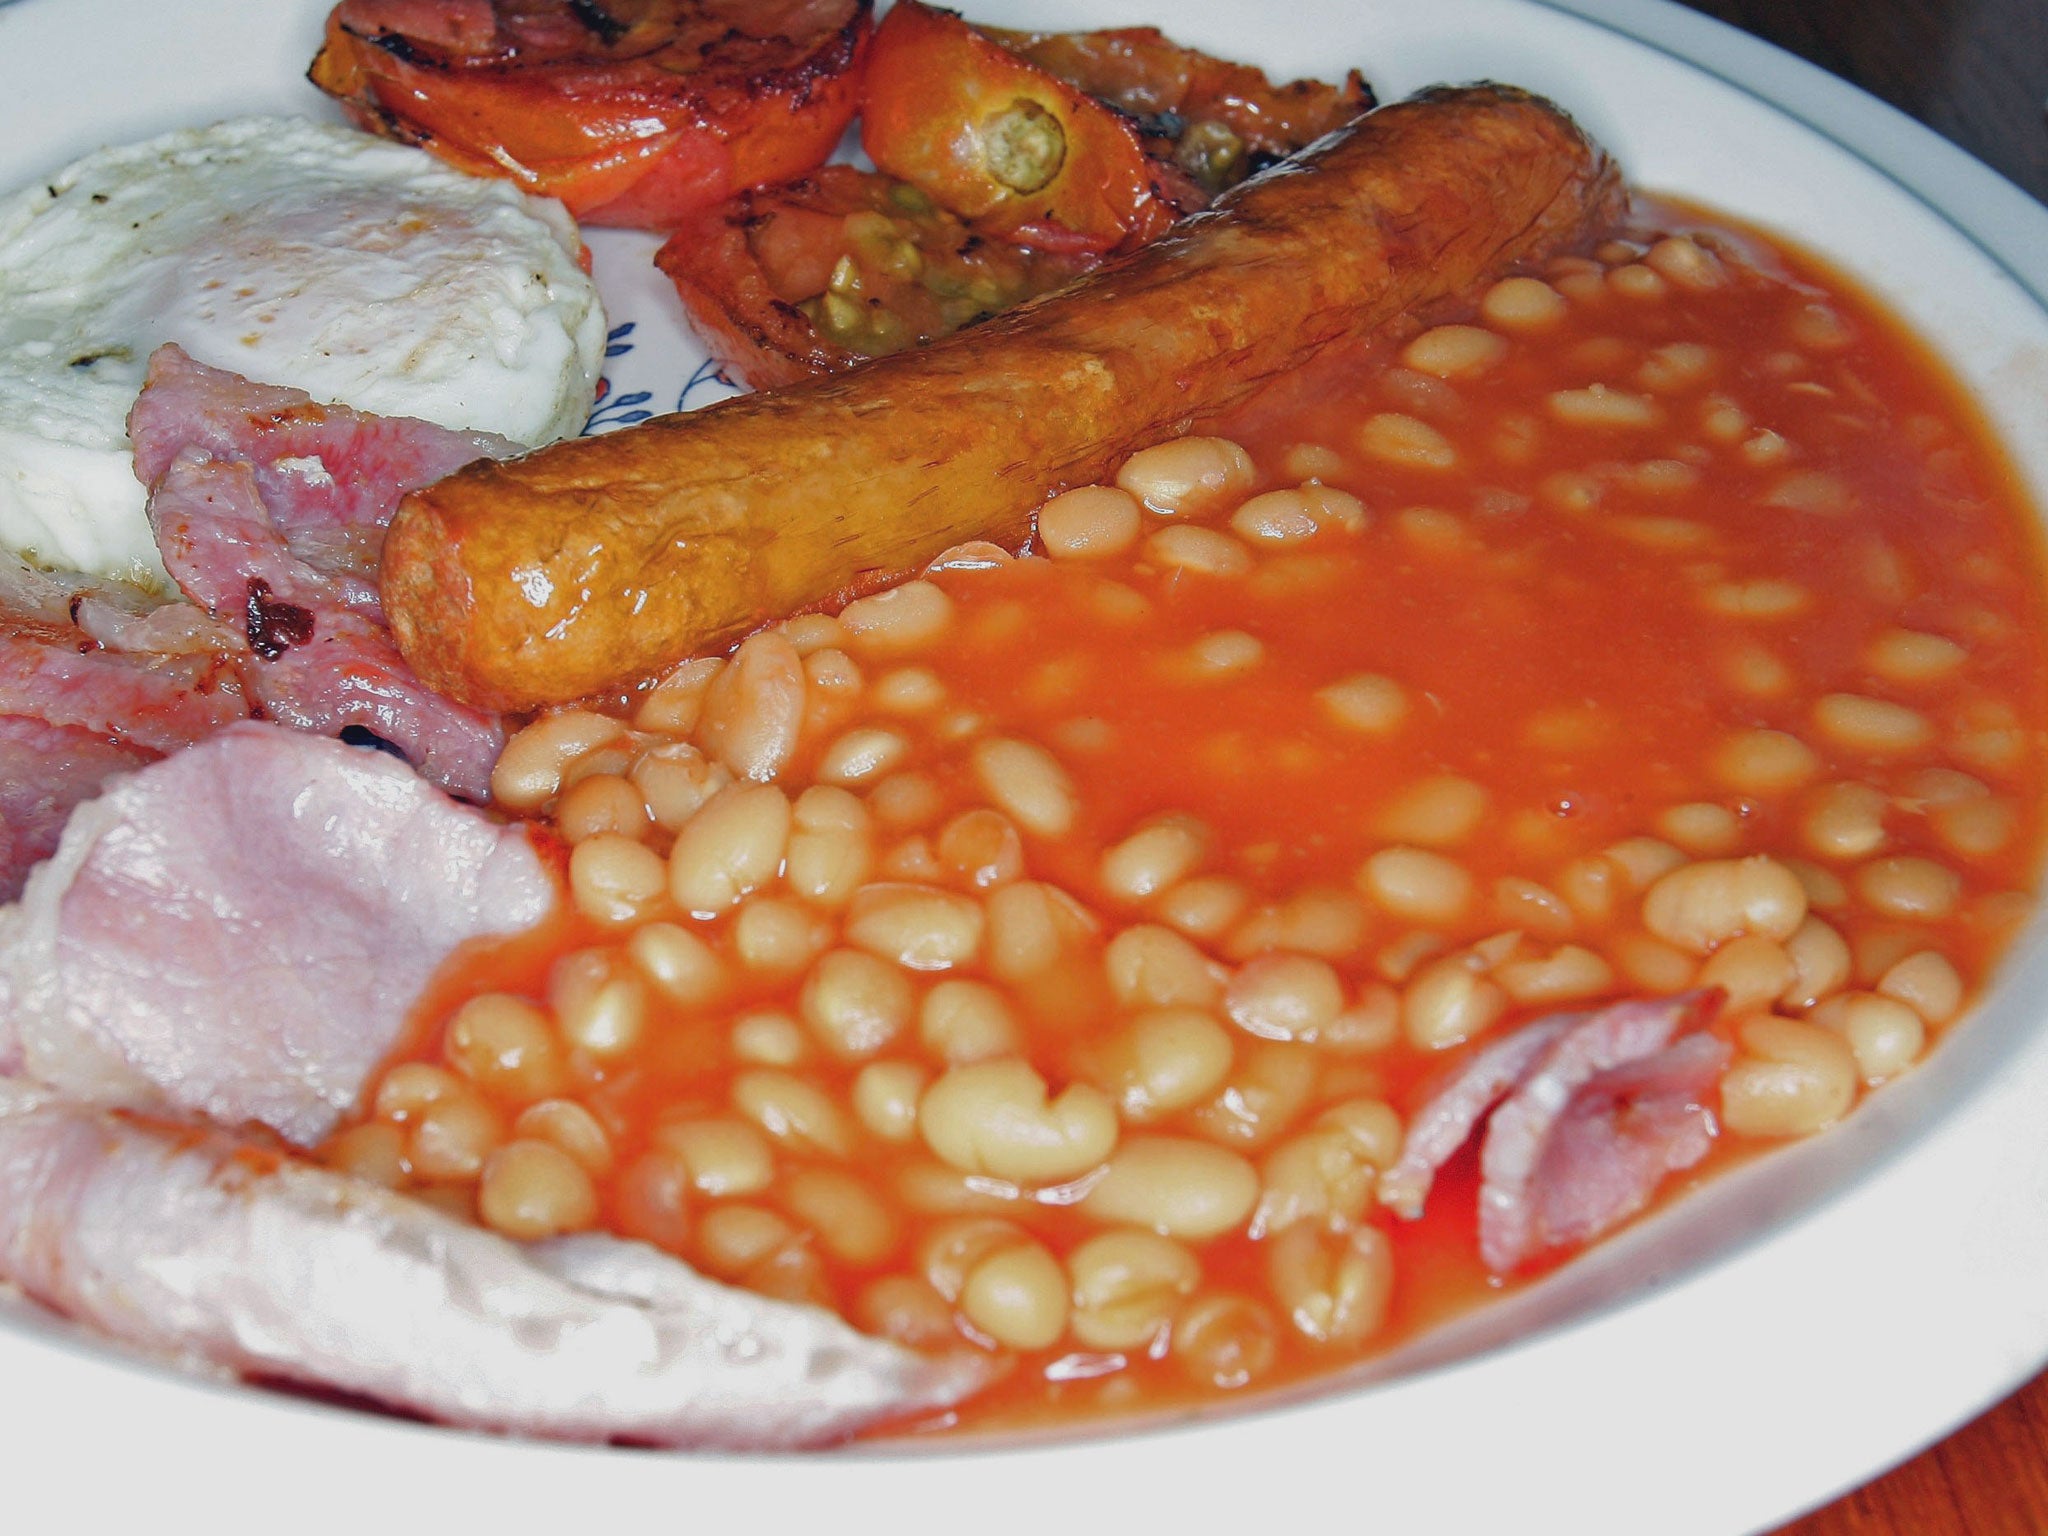 Baked beans are seen in a fried breakfast, along with rashers of bacon, a sausage, and an egg